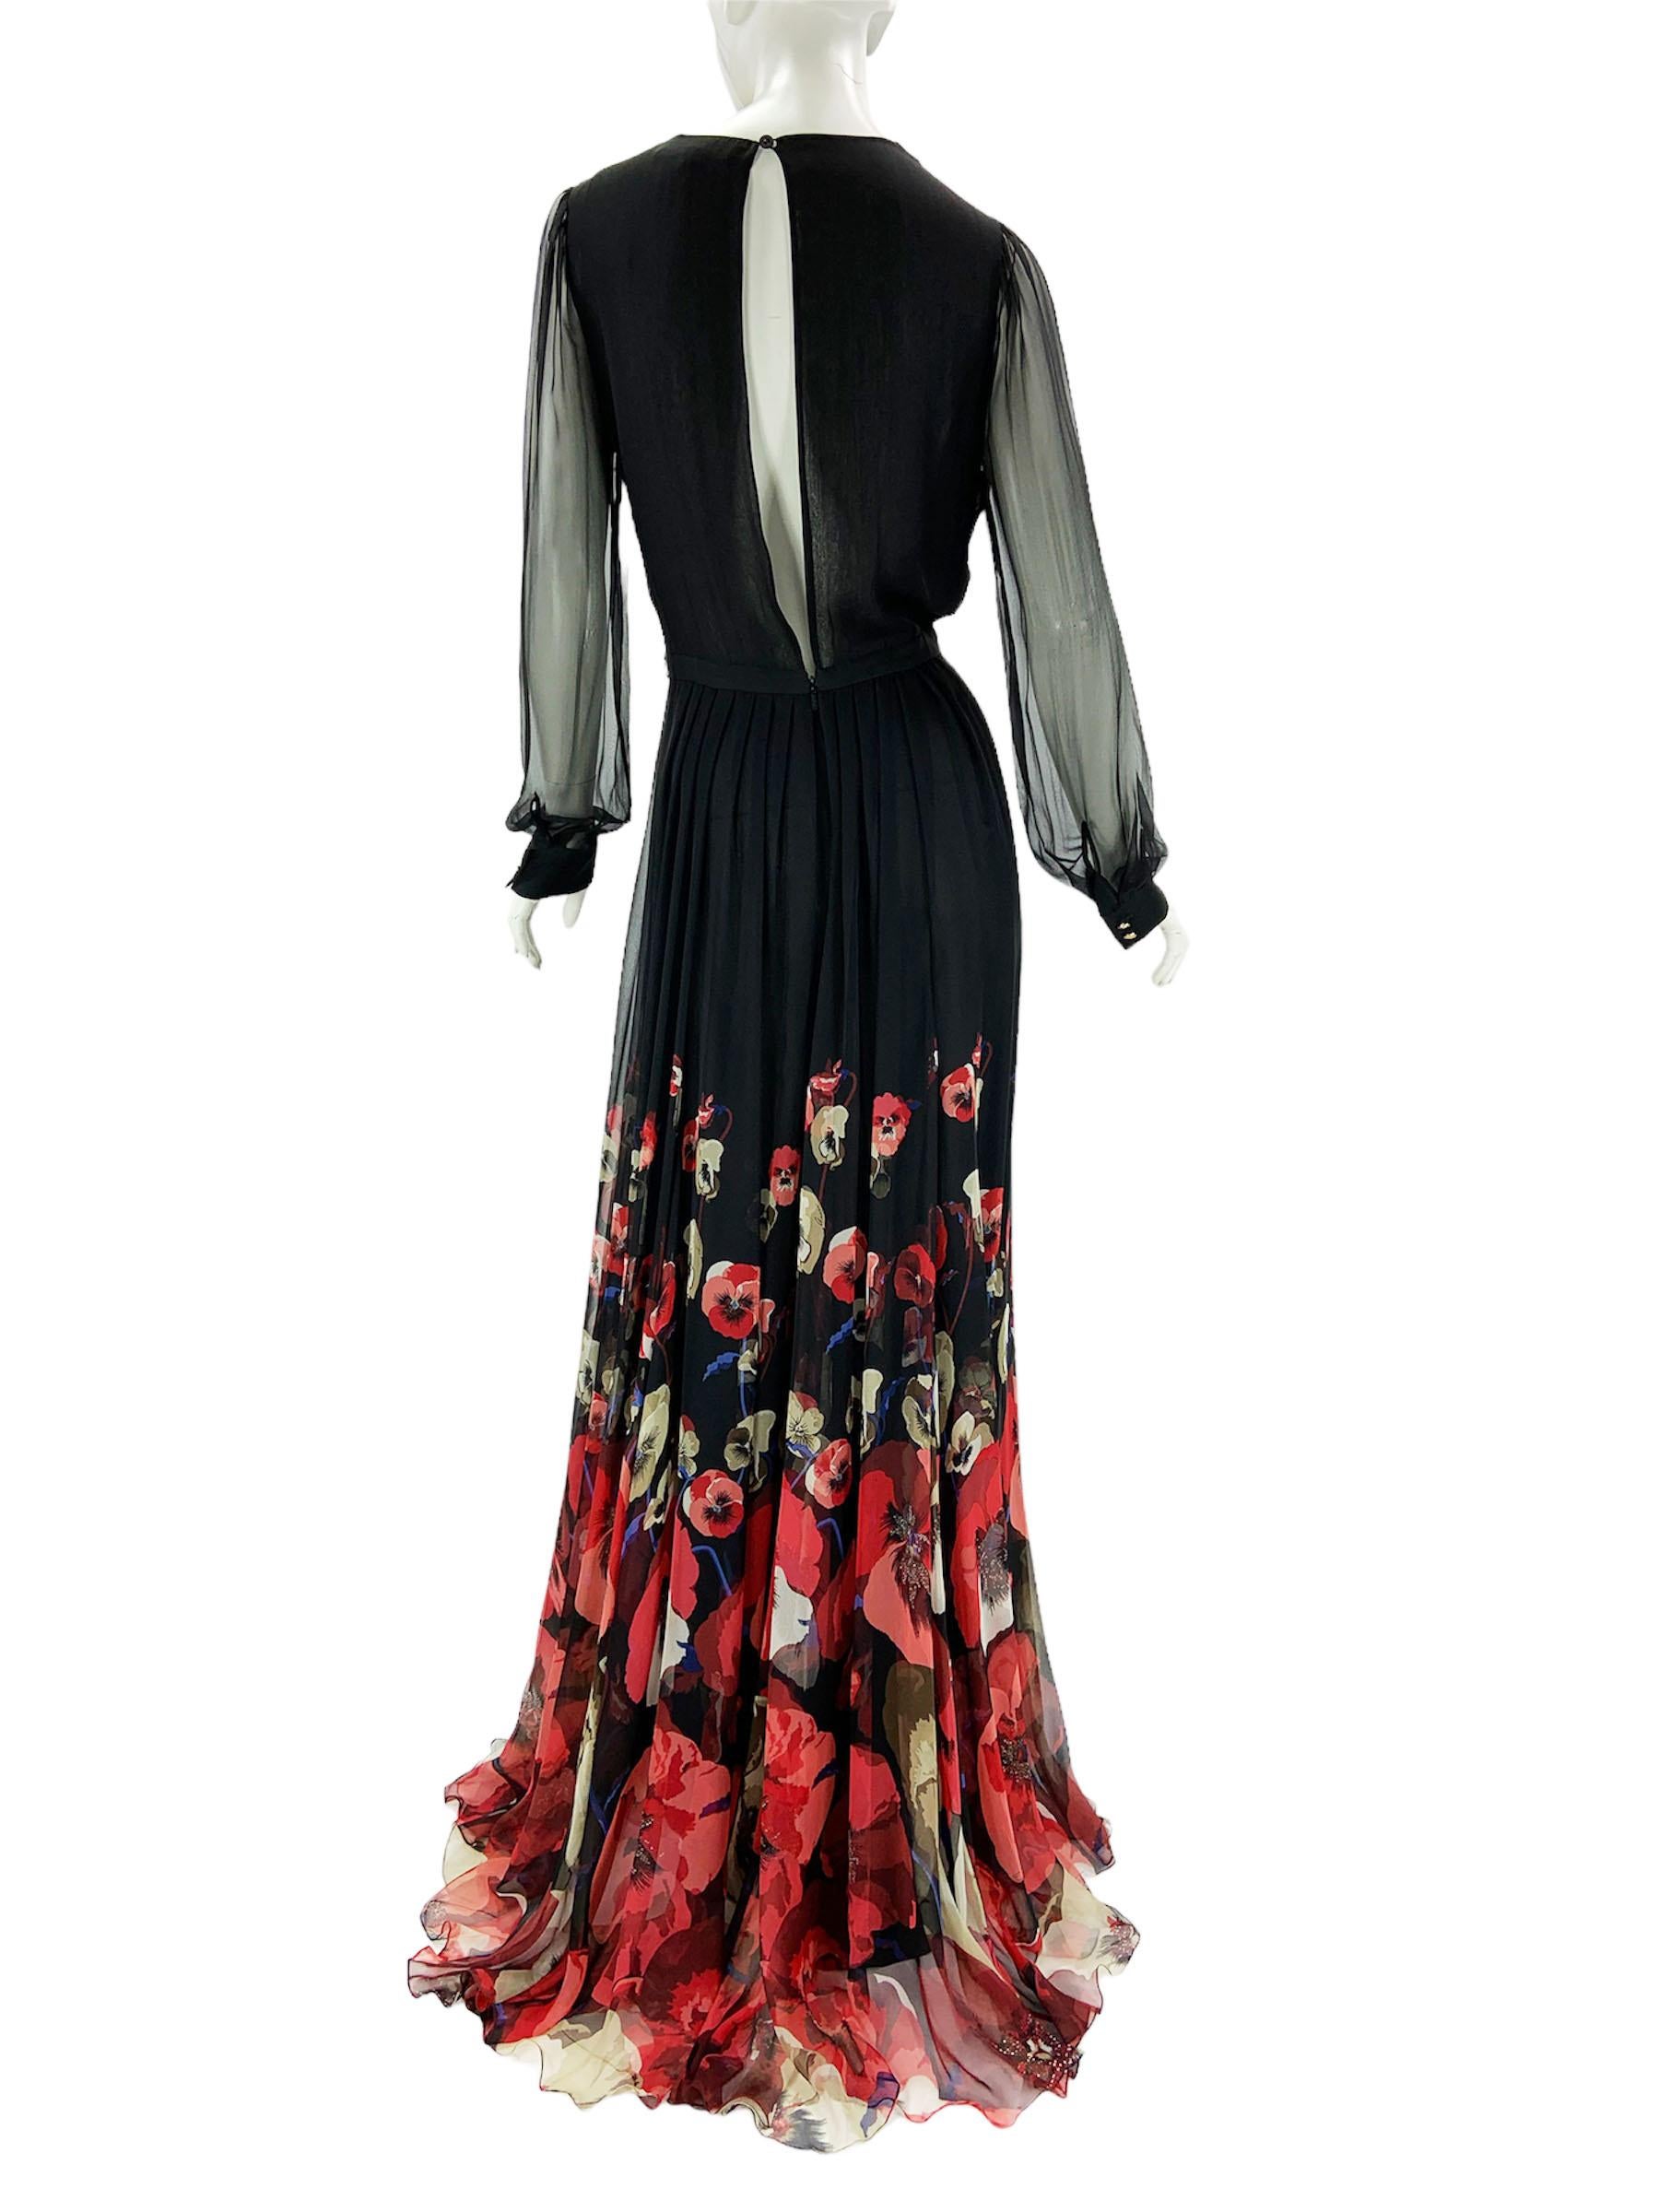 Gucci Black Silk Plunging Pansies Flowers Print Long Dress Gown Italian 42 US 6 For Sale 2